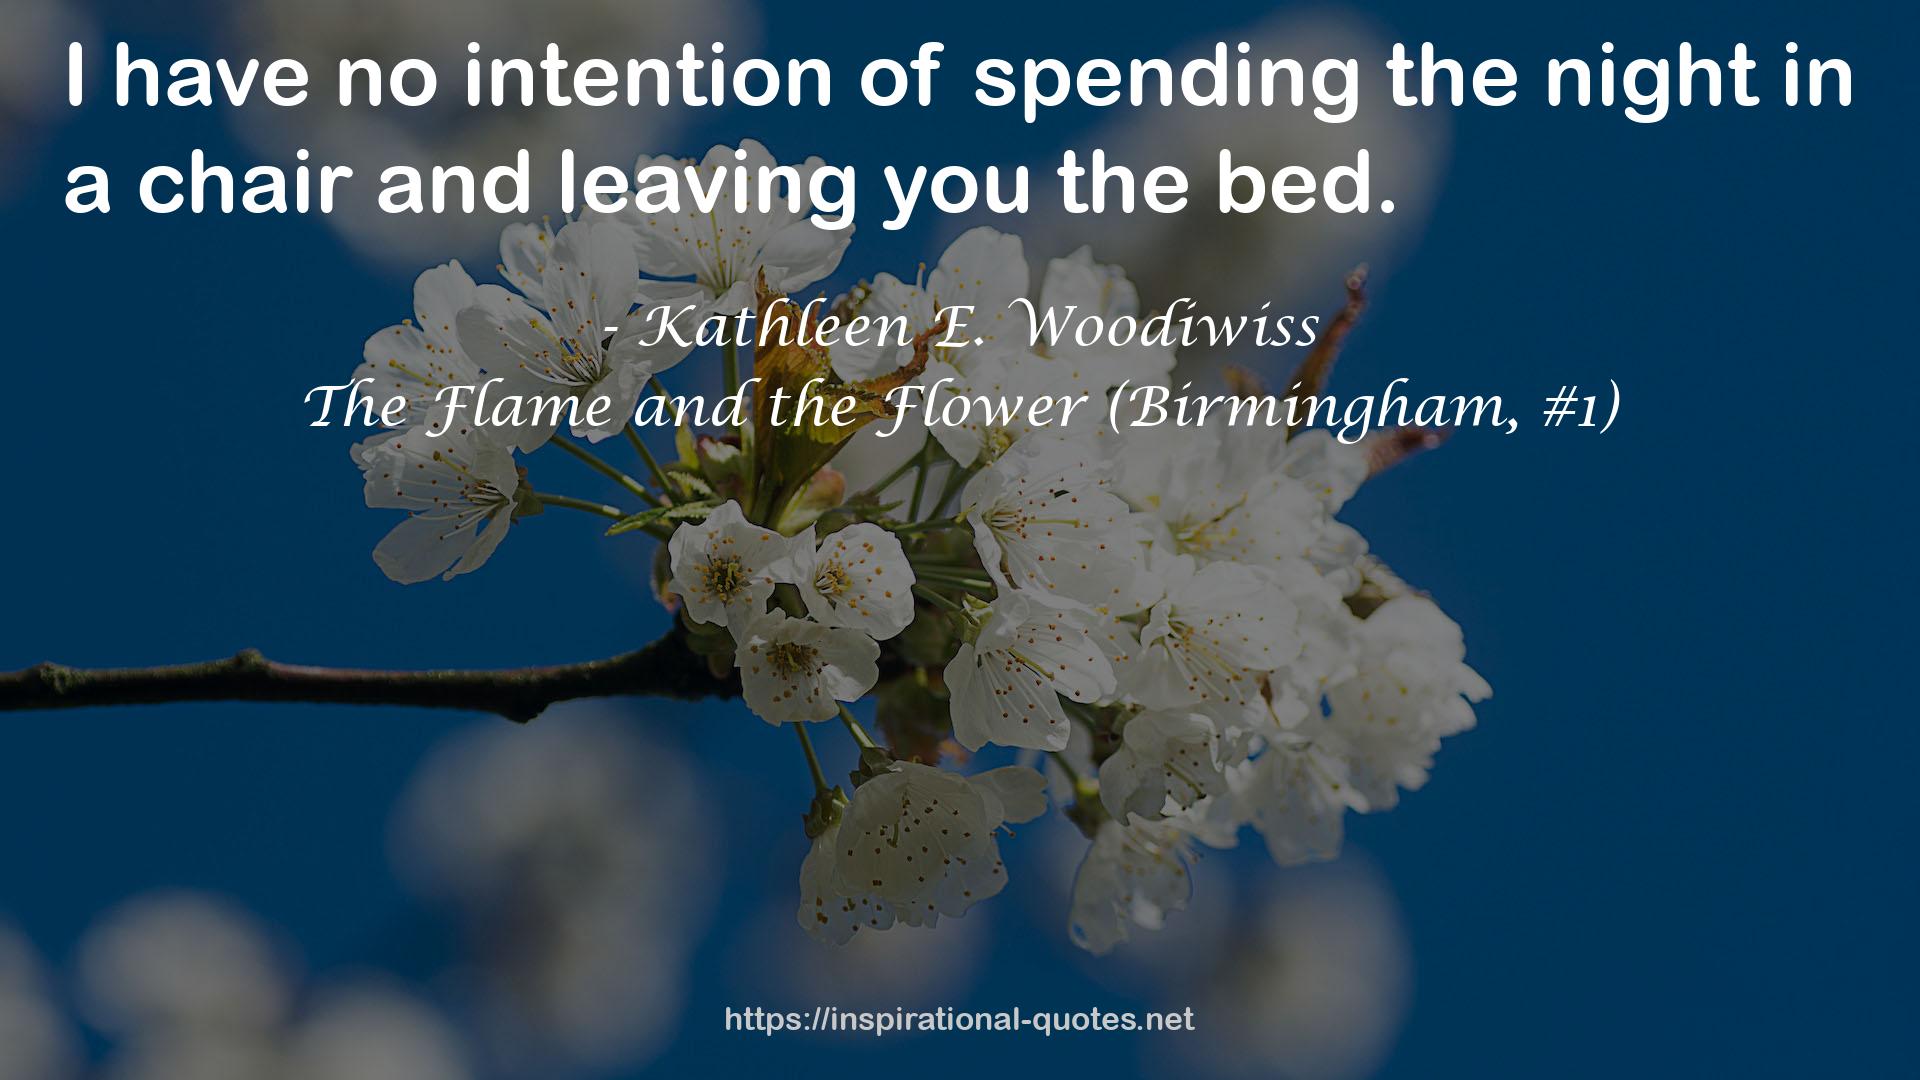 The Flame and the Flower (Birmingham, #1) QUOTES